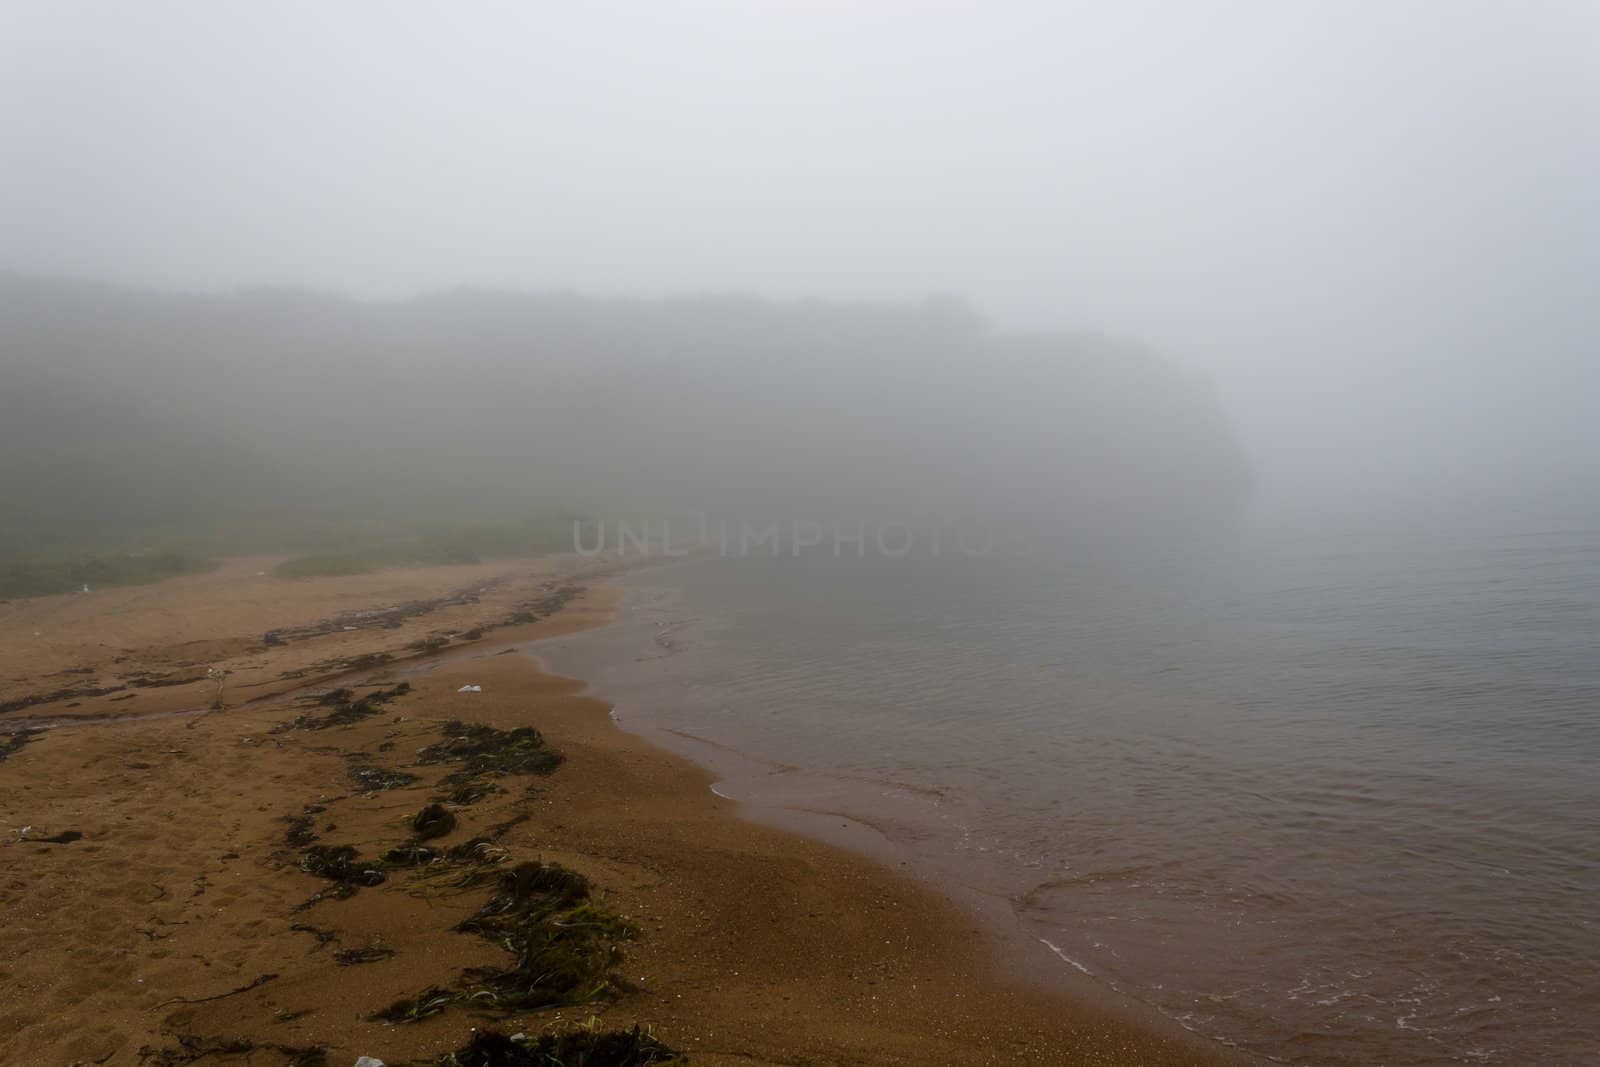 The foggy seashore with the rock and trees